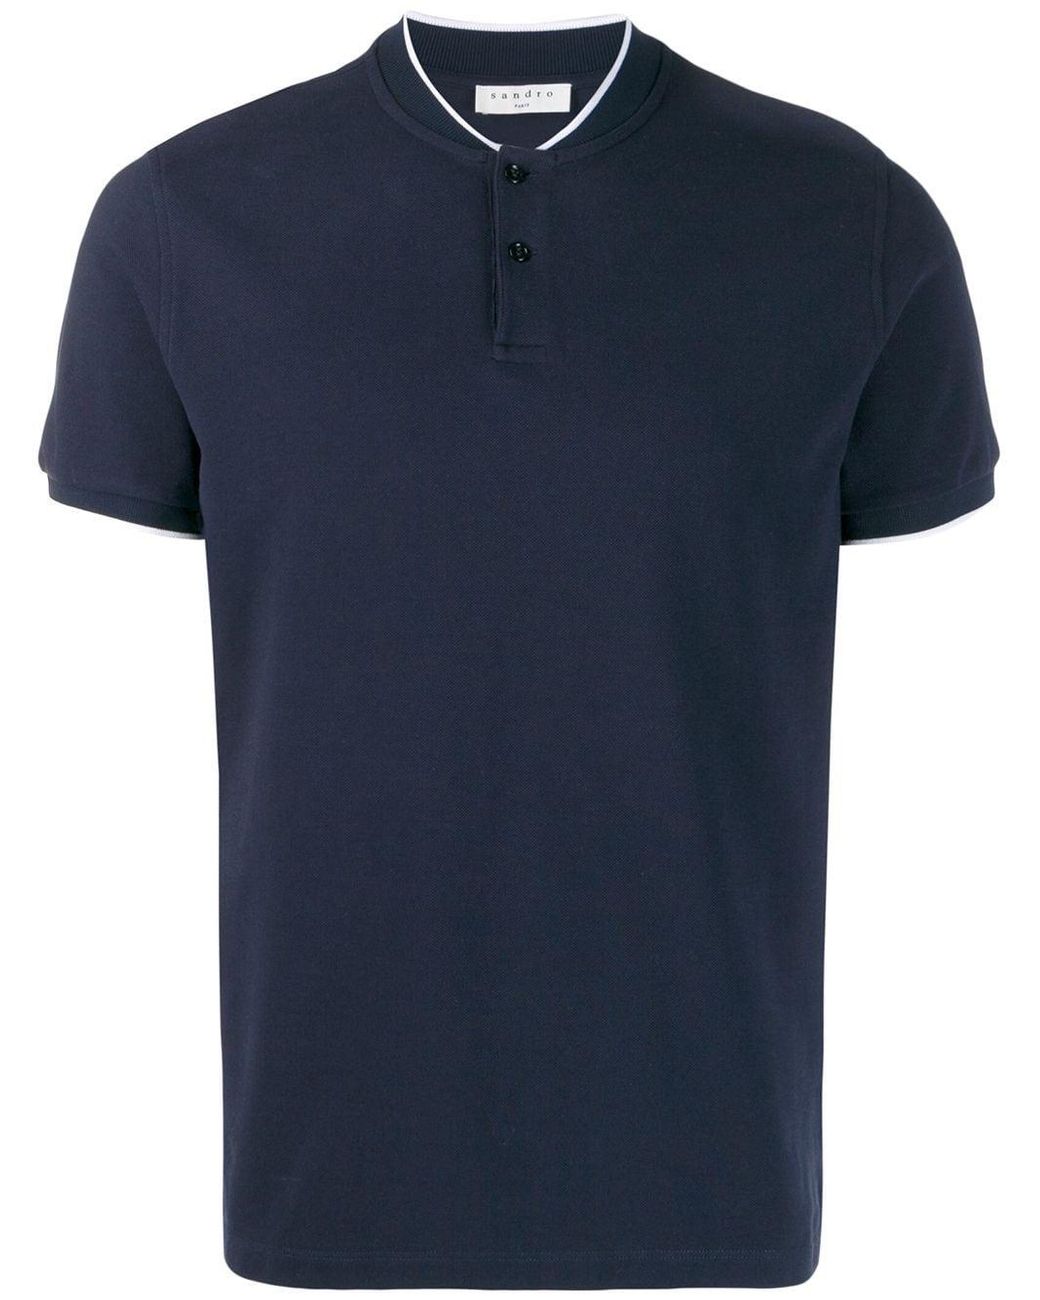 Sandro Cotton Round Neck Polo Shirt in Blue for Men - Lyst